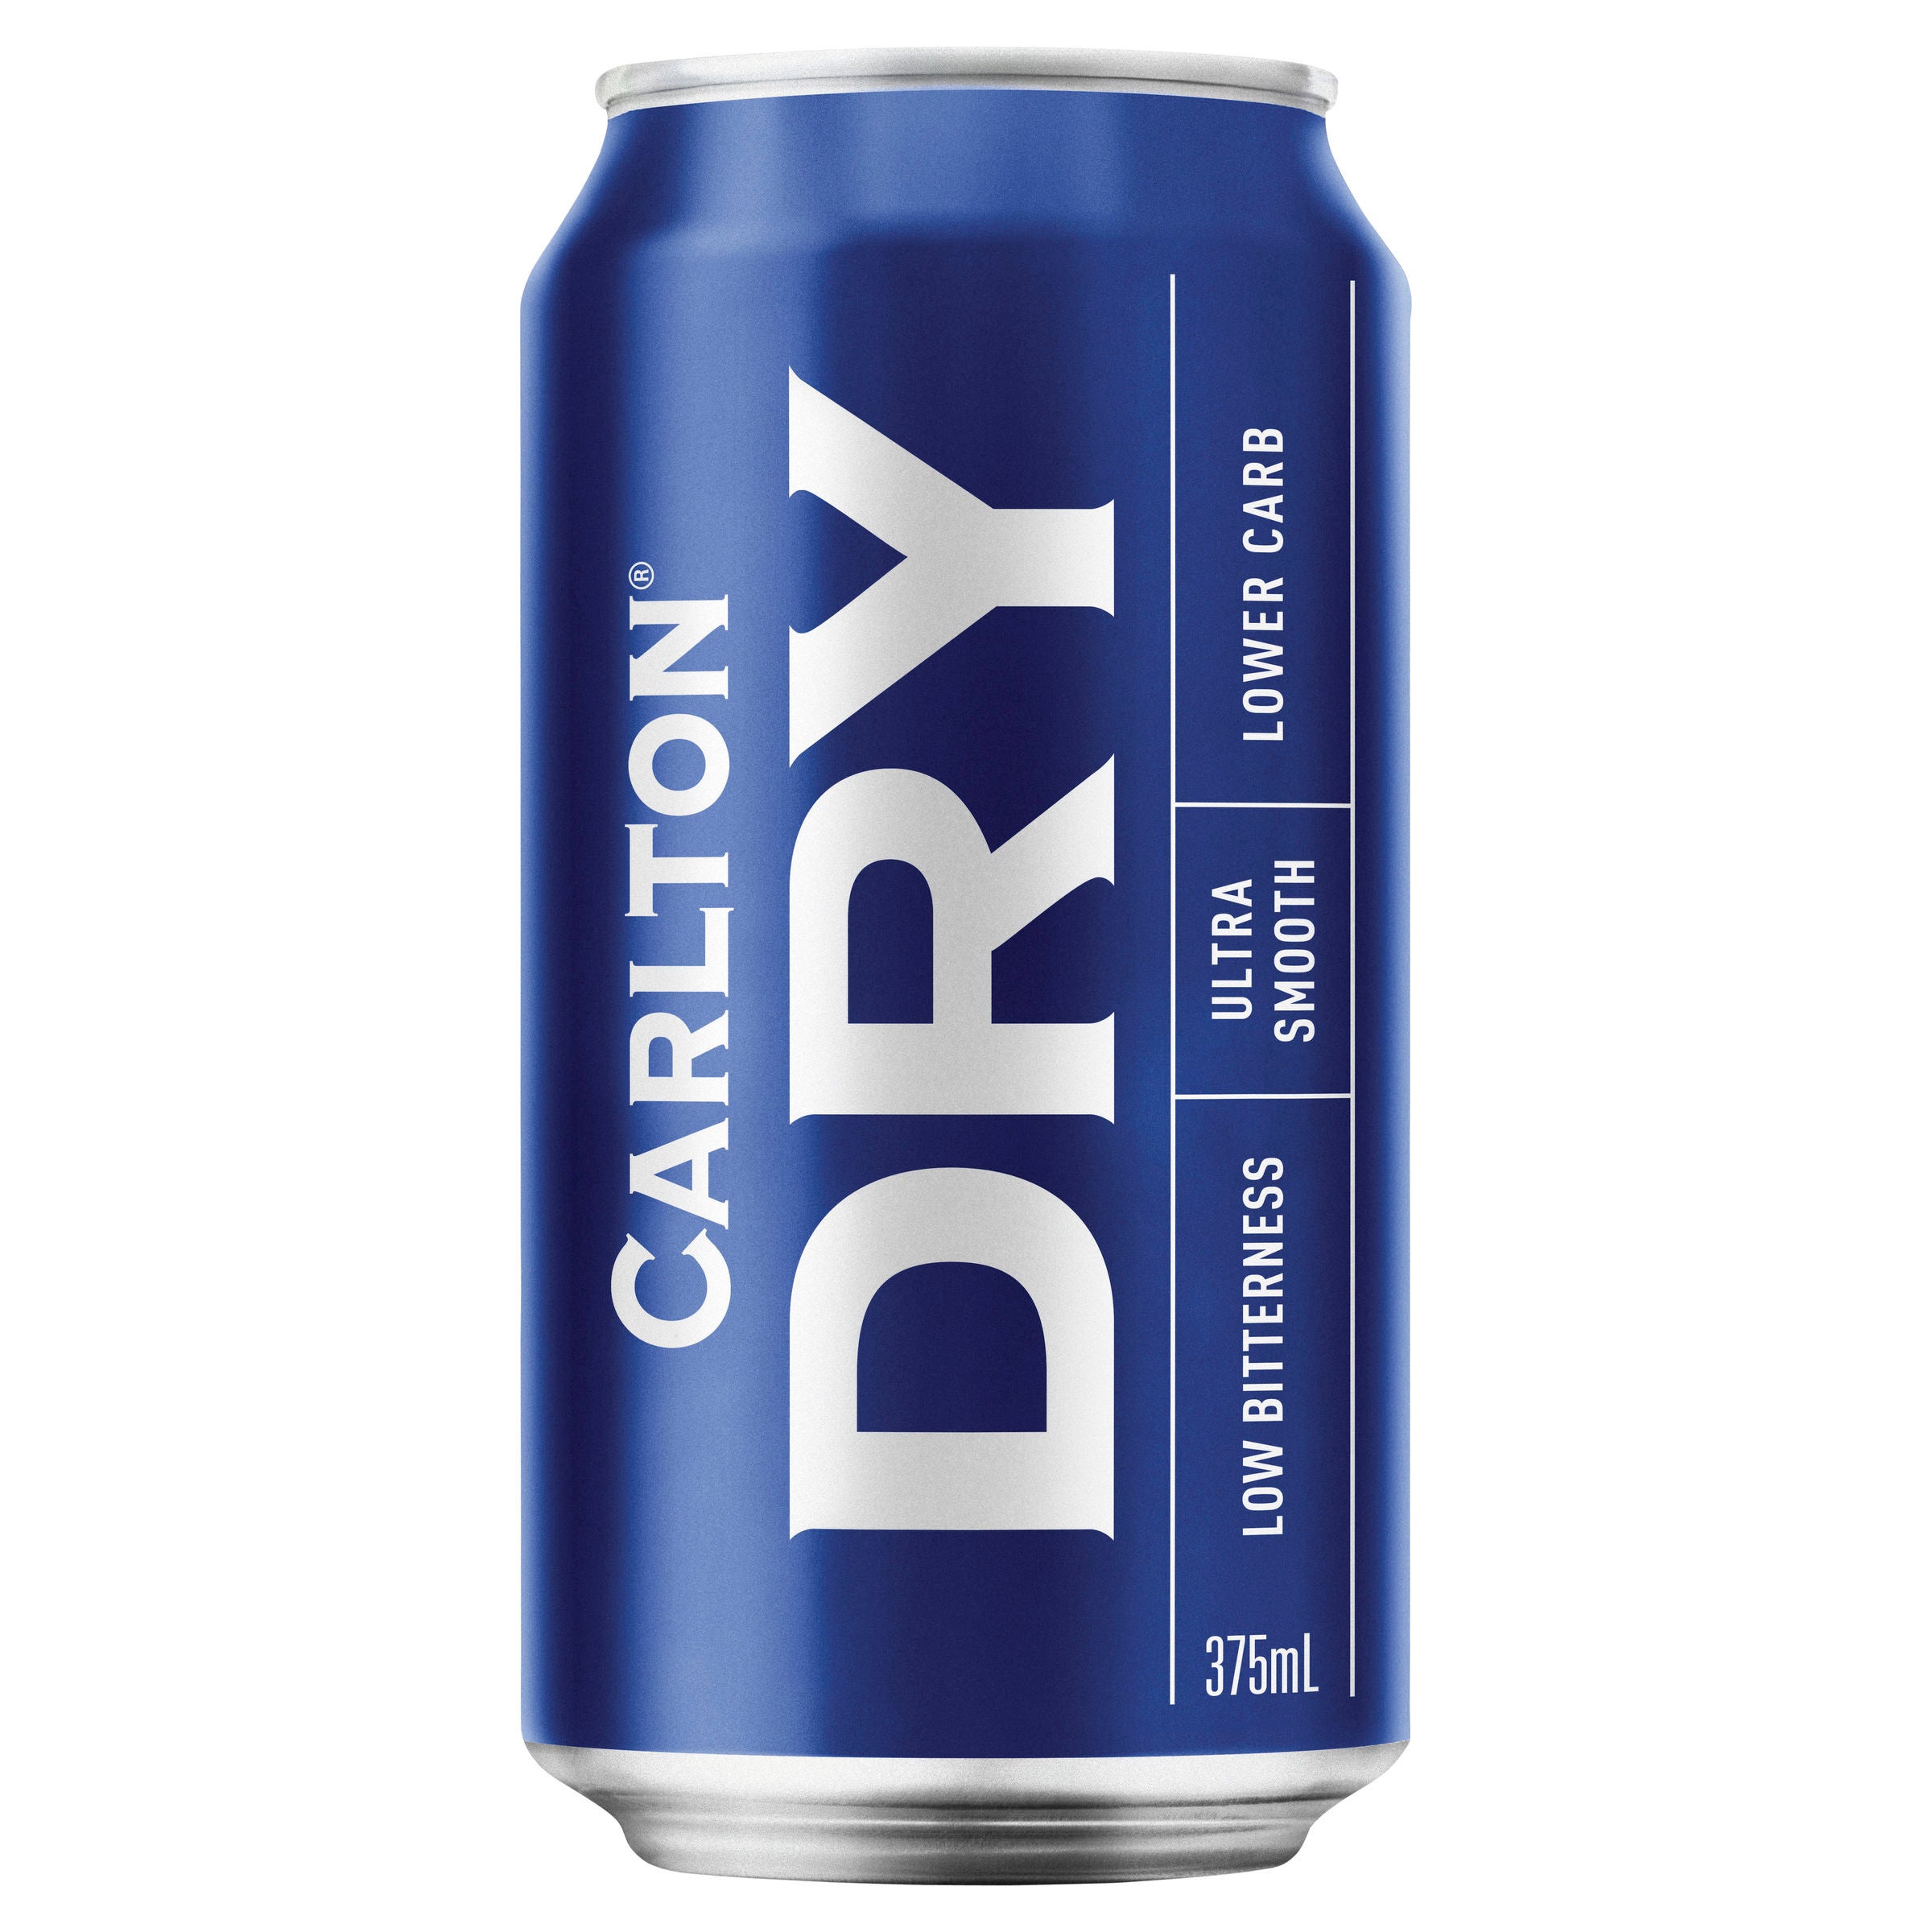 Carlton Dry Beer Case 30 x 375mL Cans